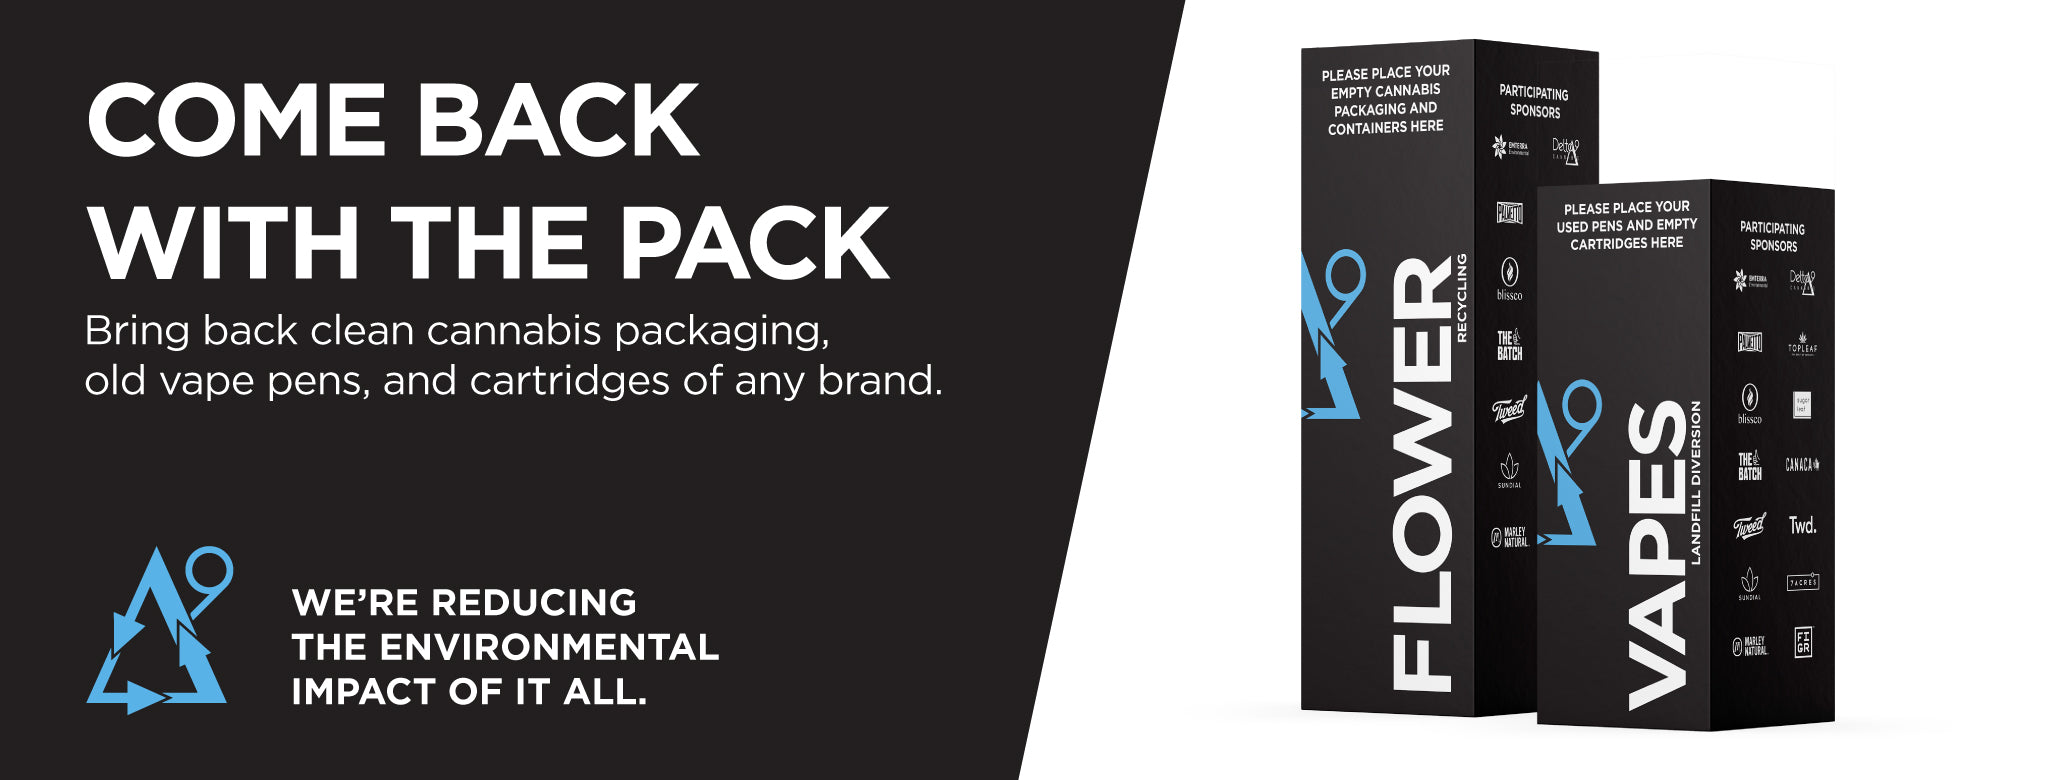 Come back with the pack - cannabis packaging and vape collection program